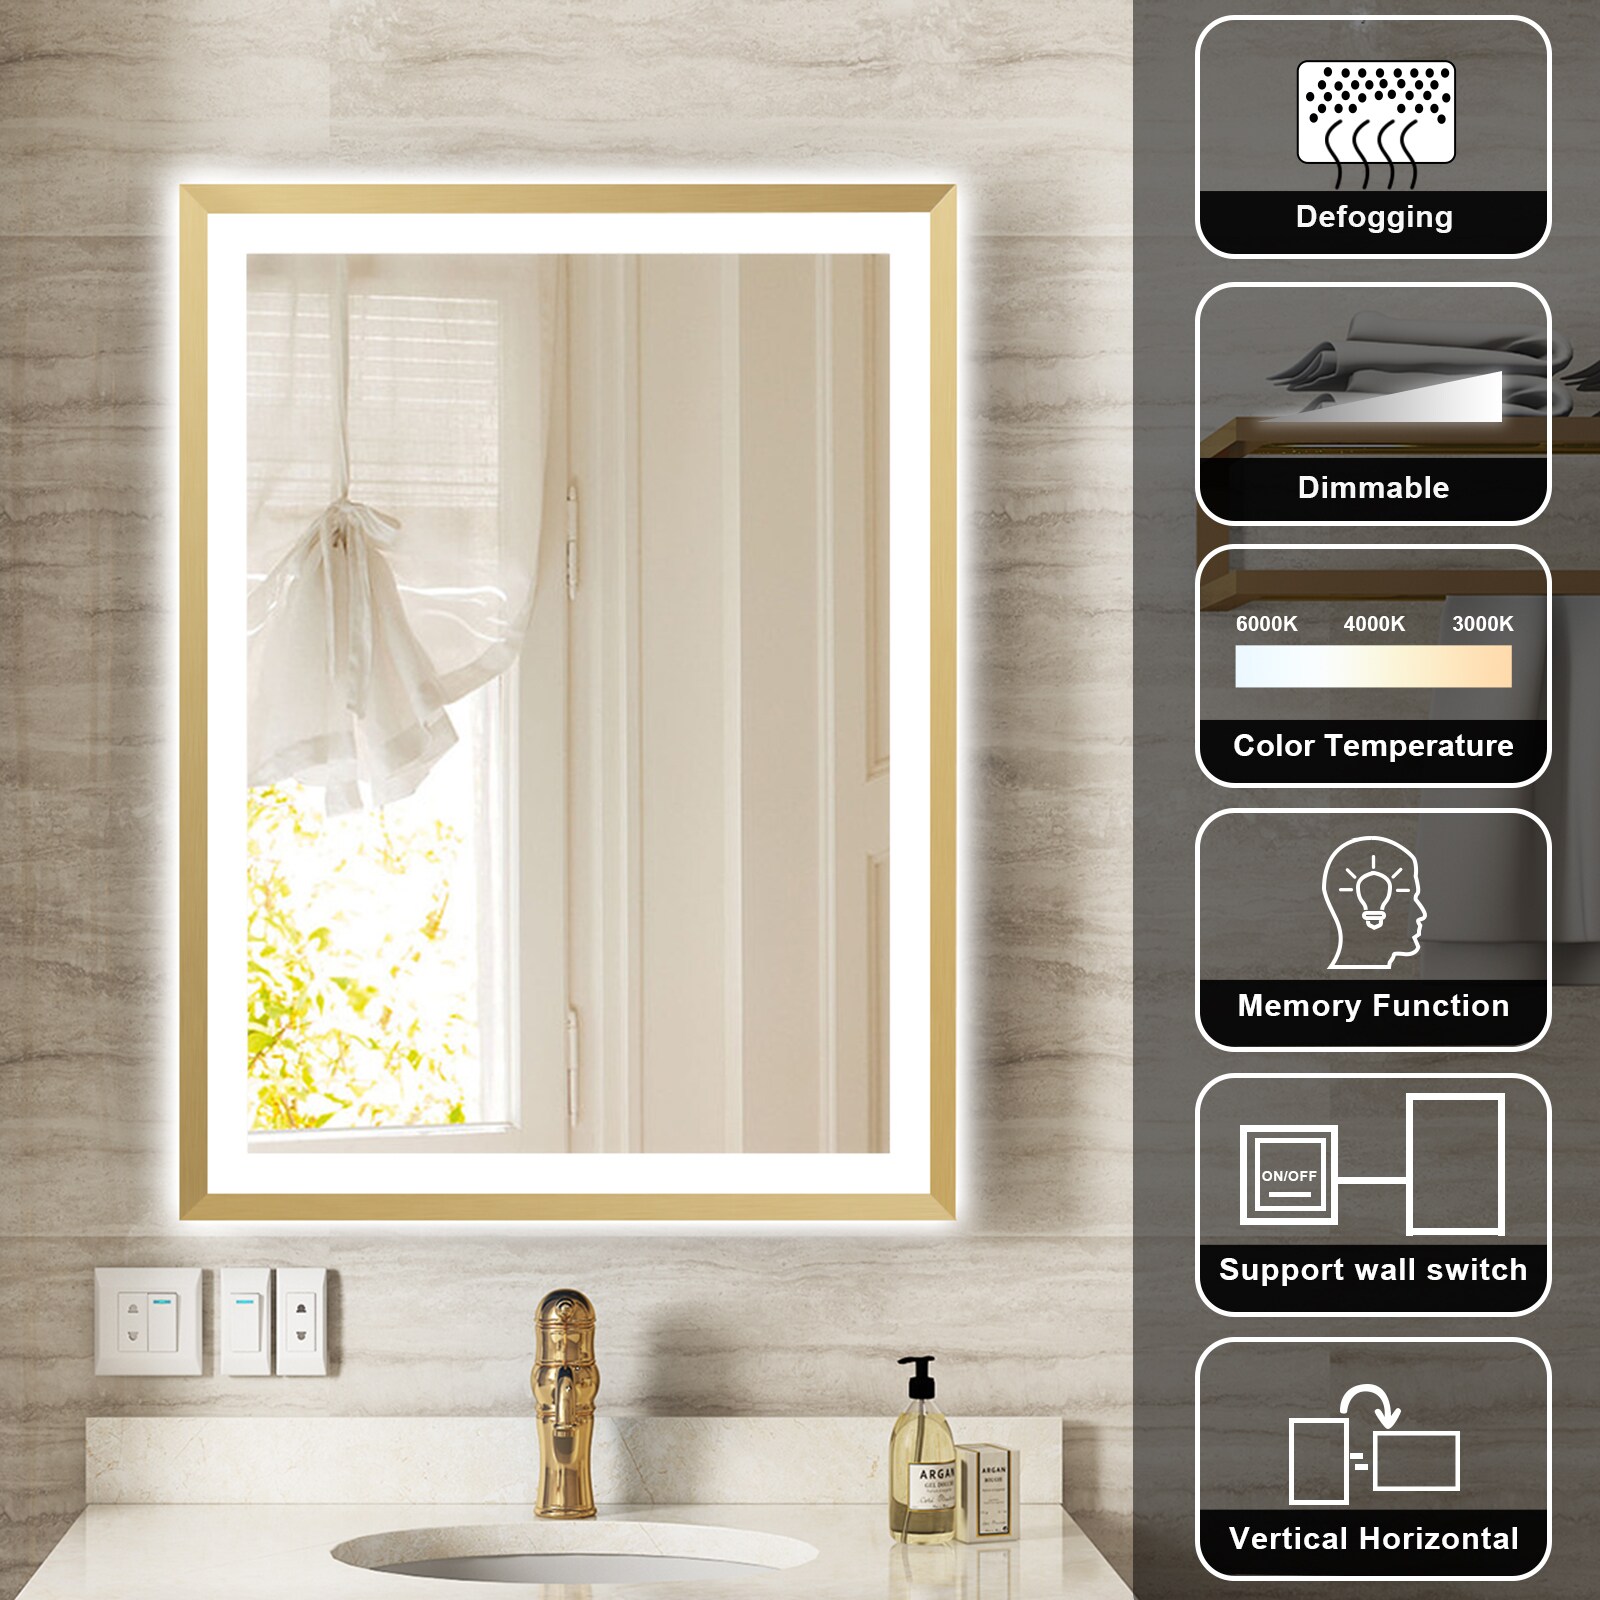 WELLFOR LUKY Dimmable LED Lighting Bathroom Mirror 24-in x 32-in Framed ...